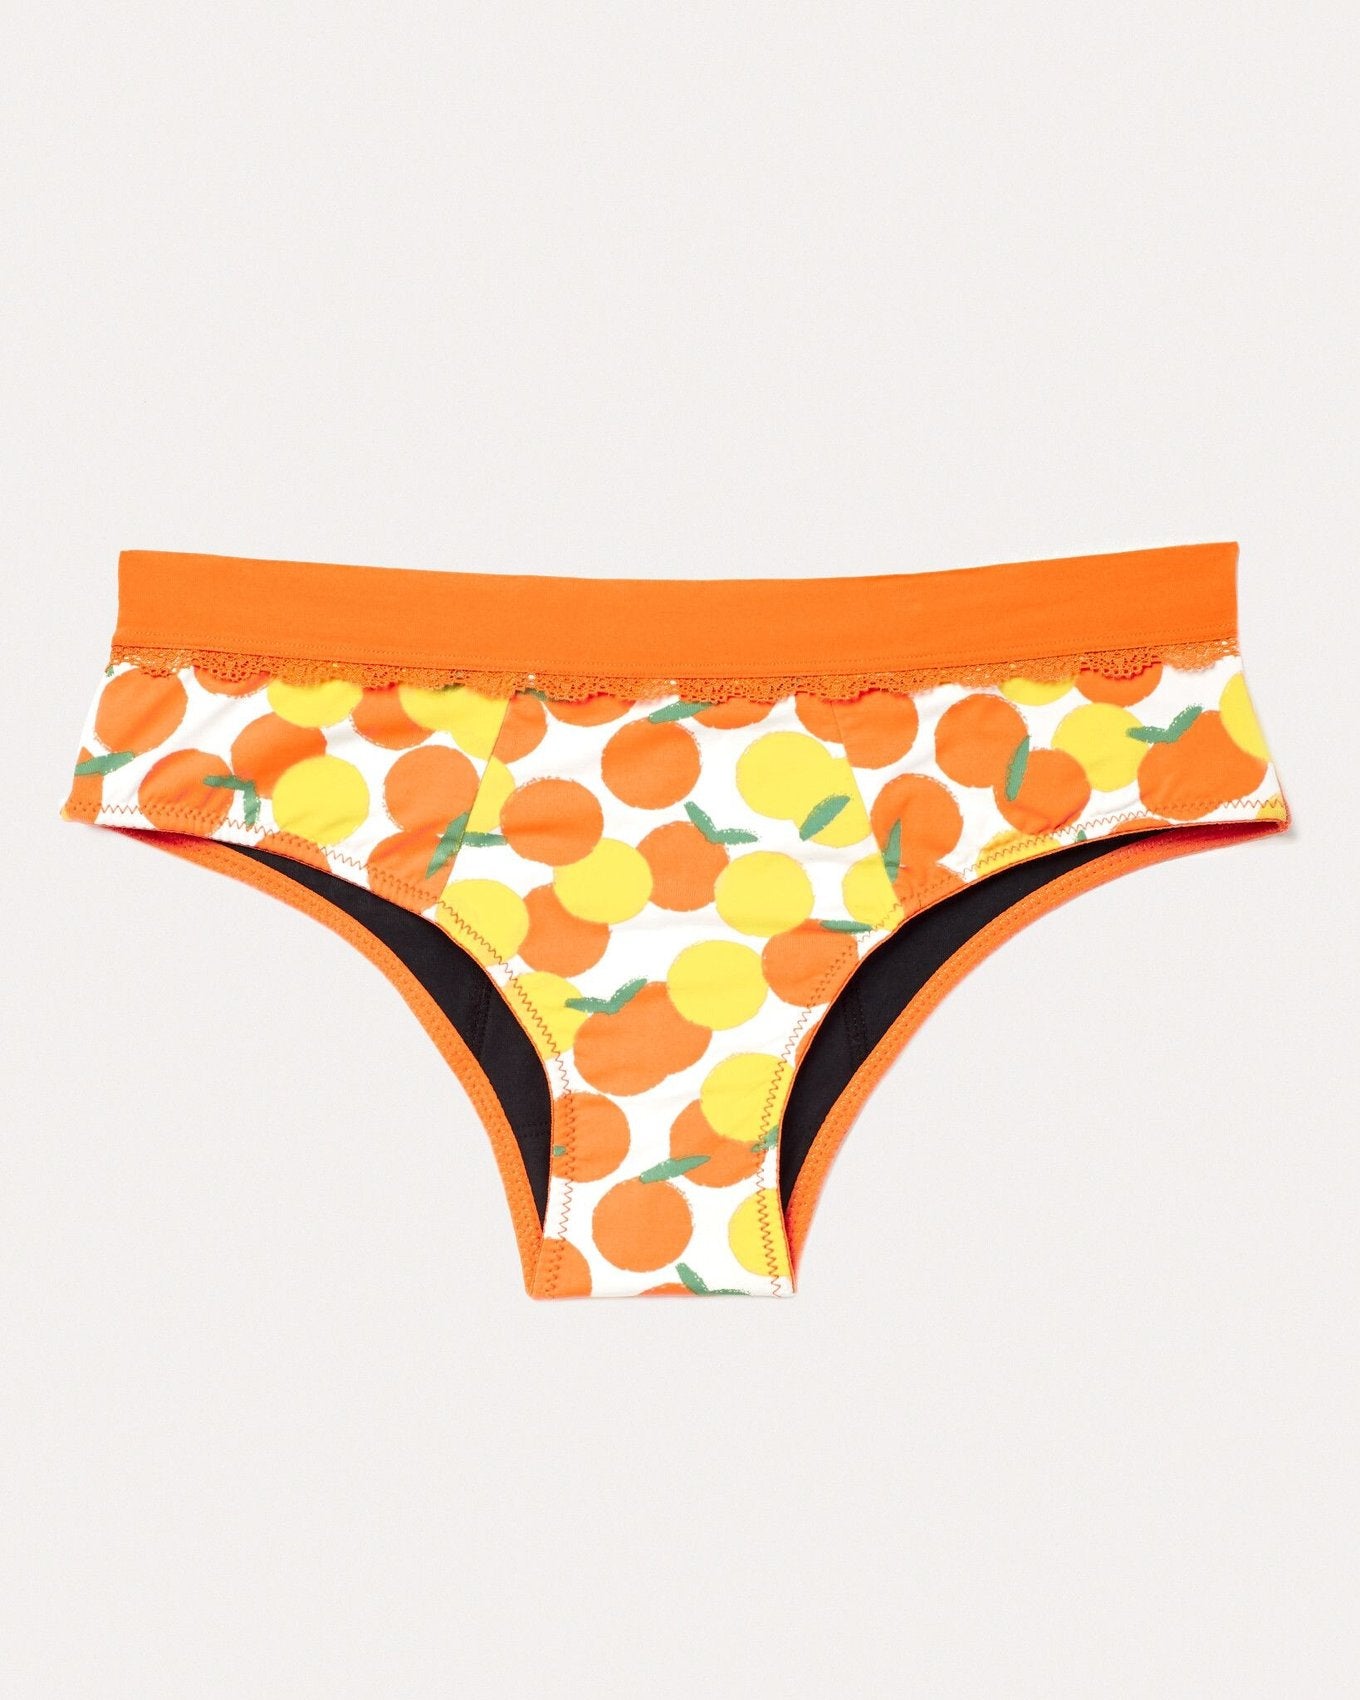 Joyja Cindy period-proof panty in color Zest of Life and shape cheeky